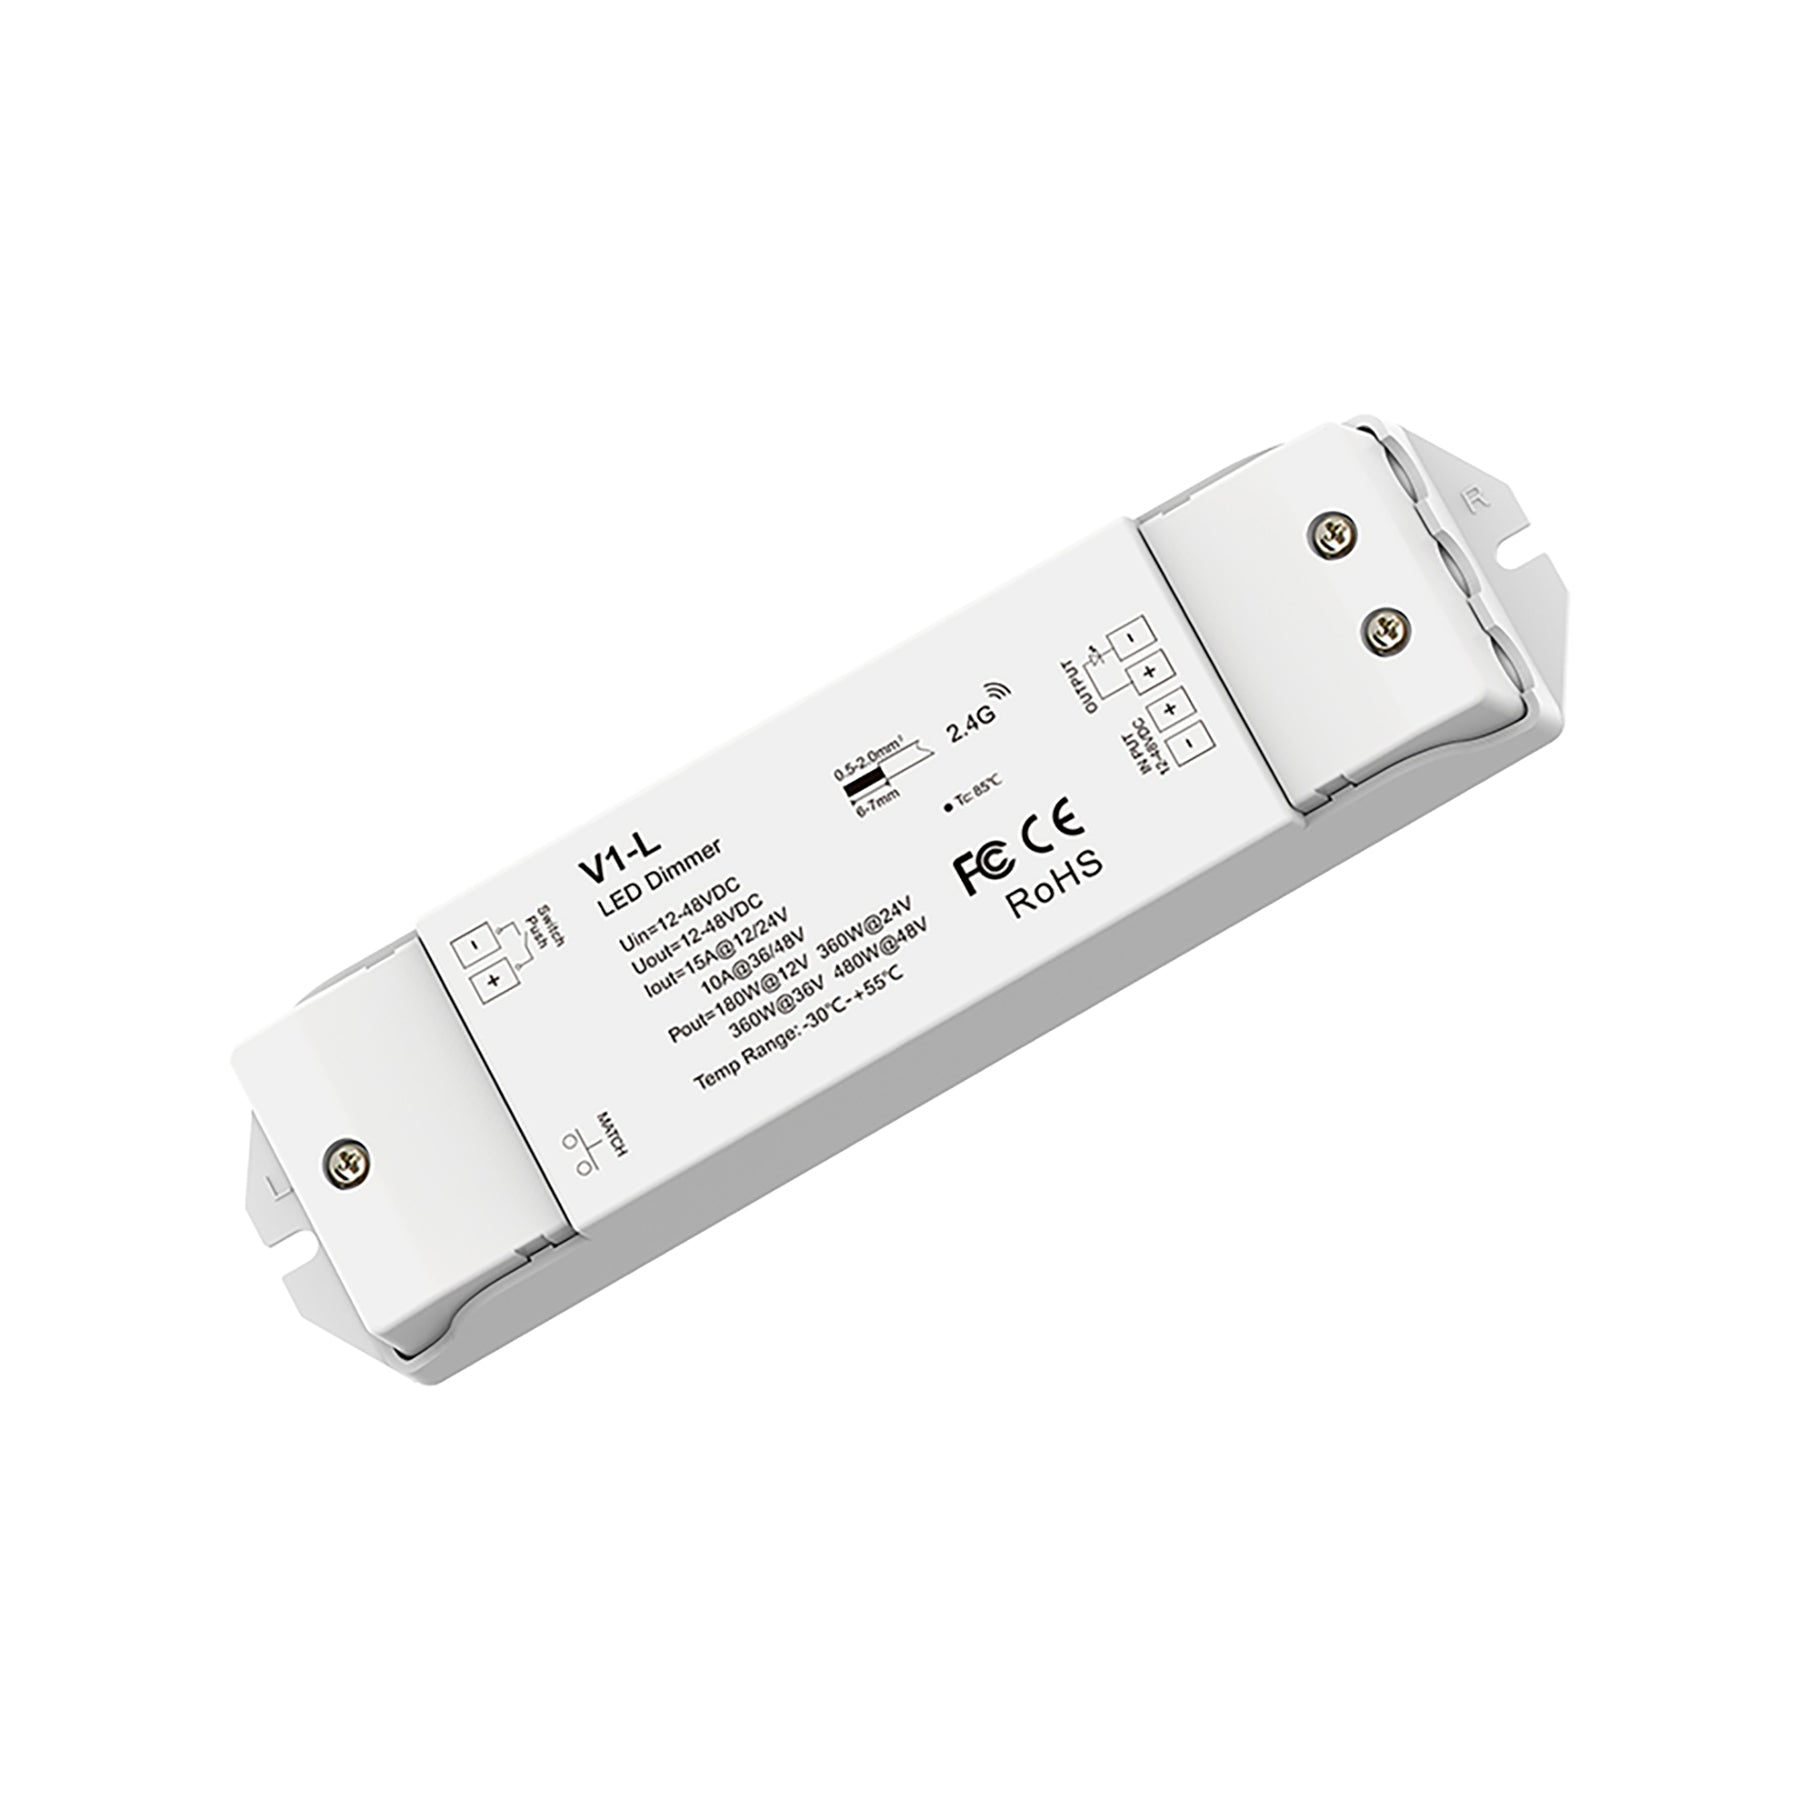 G.W.S. LED LED 12-48V DC Dimming Controller V1-L + 4 Zone Panel Remote Control 2*AAA Battery T21